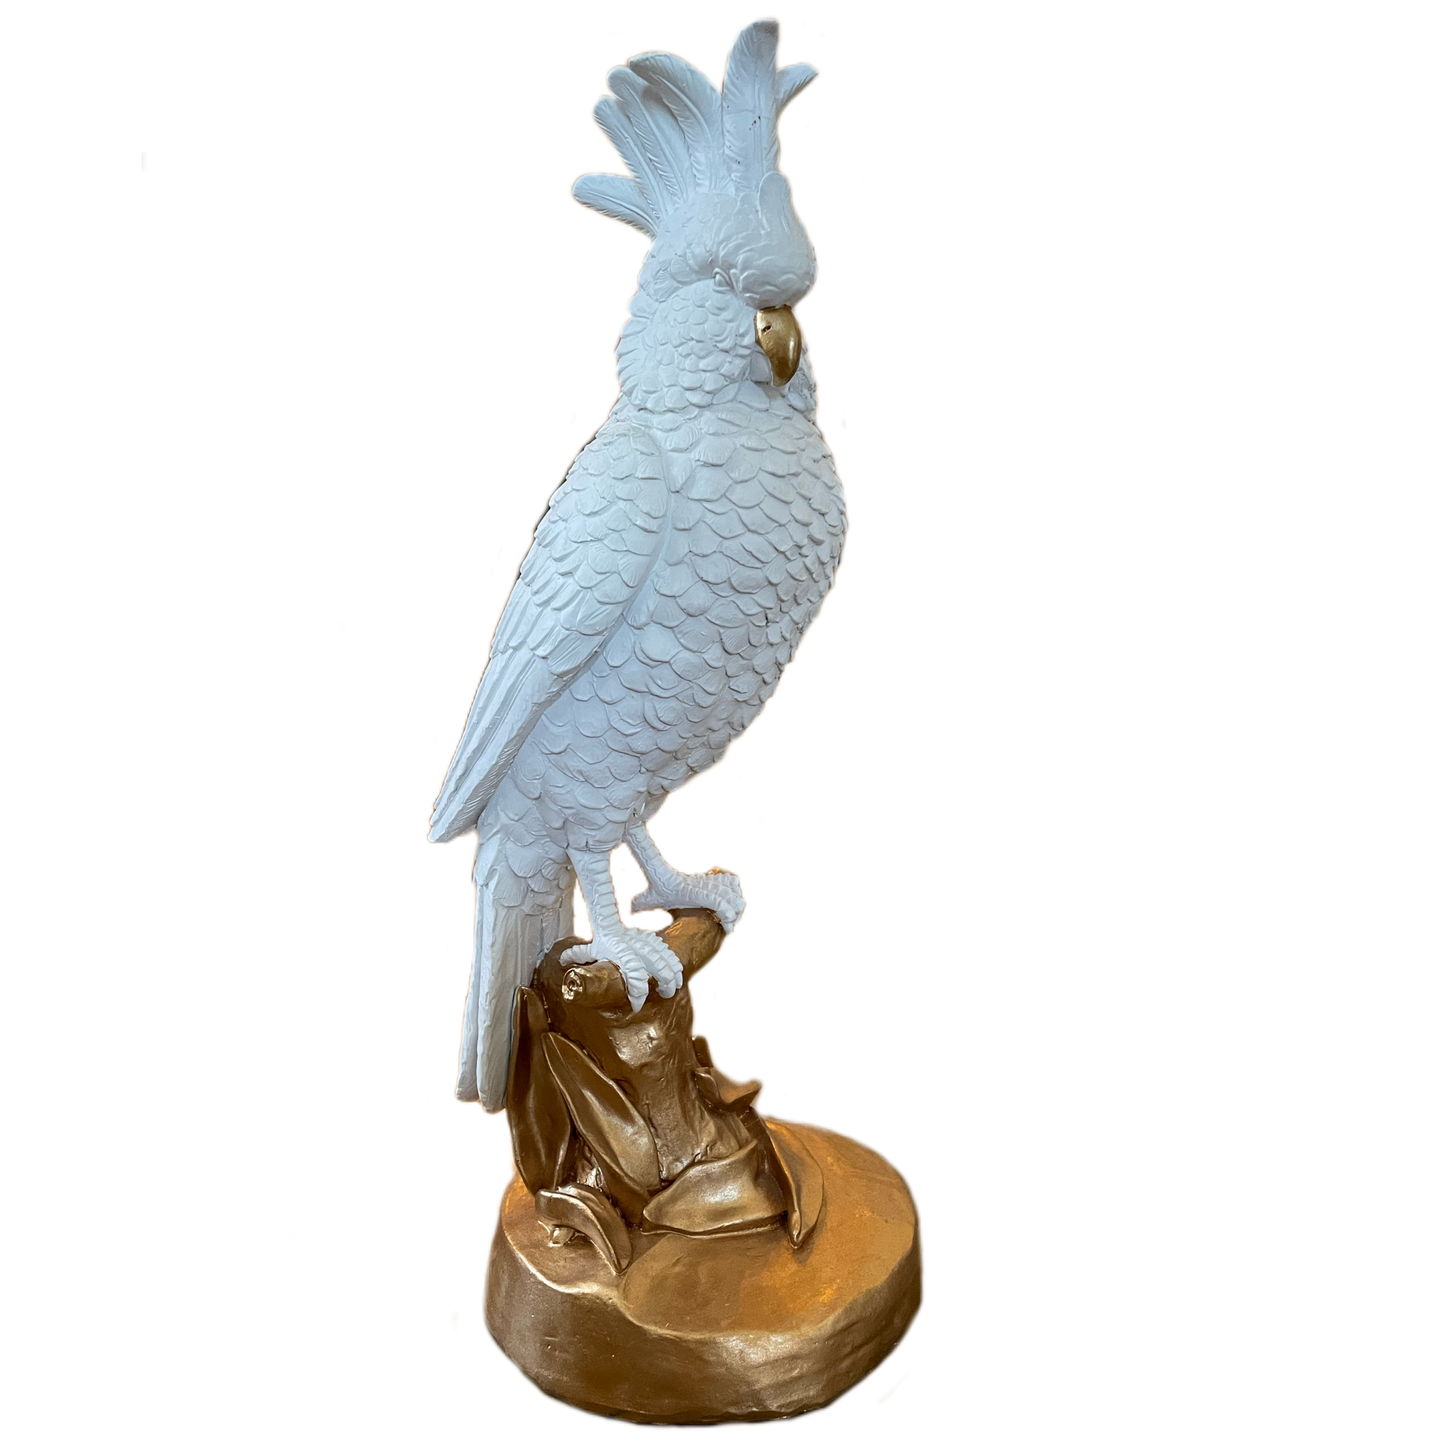 Gilded White Perched Parrot